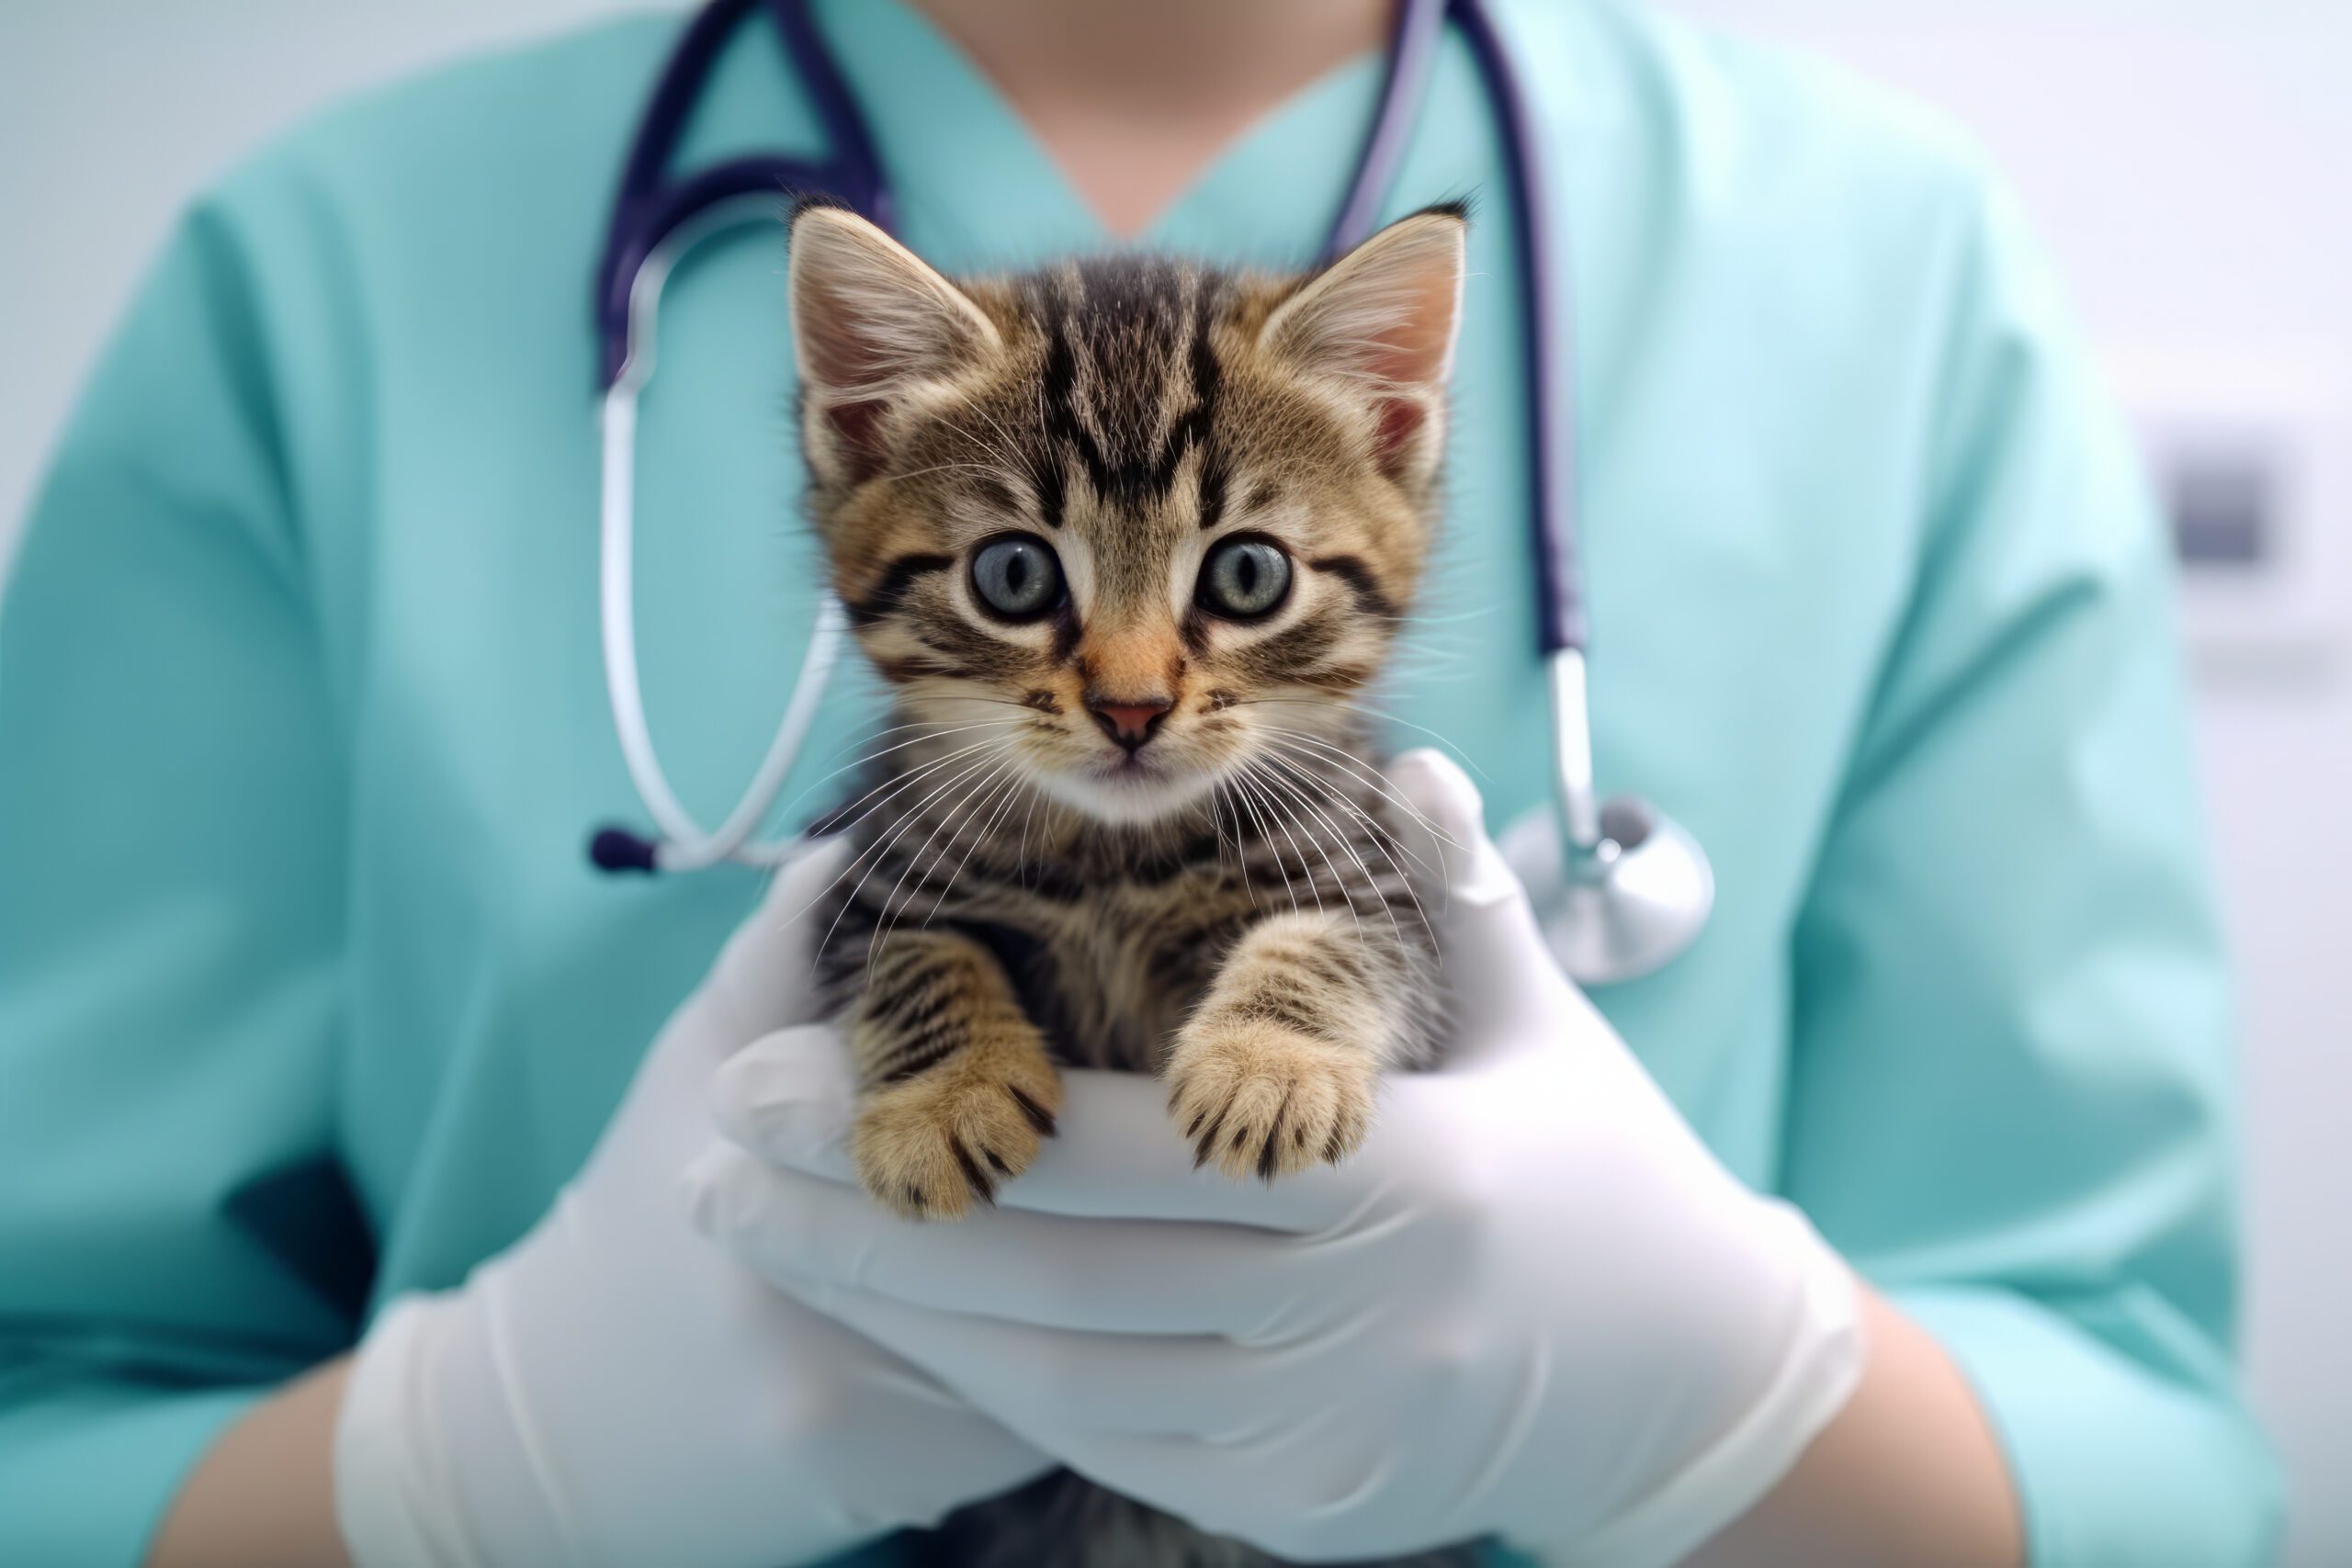 Professional Veterinarian Conducting A Regular Health Checkup On A Kitten At A Veterinary Clinic Healthcare For Pets, Providing Safe And Loving Environment